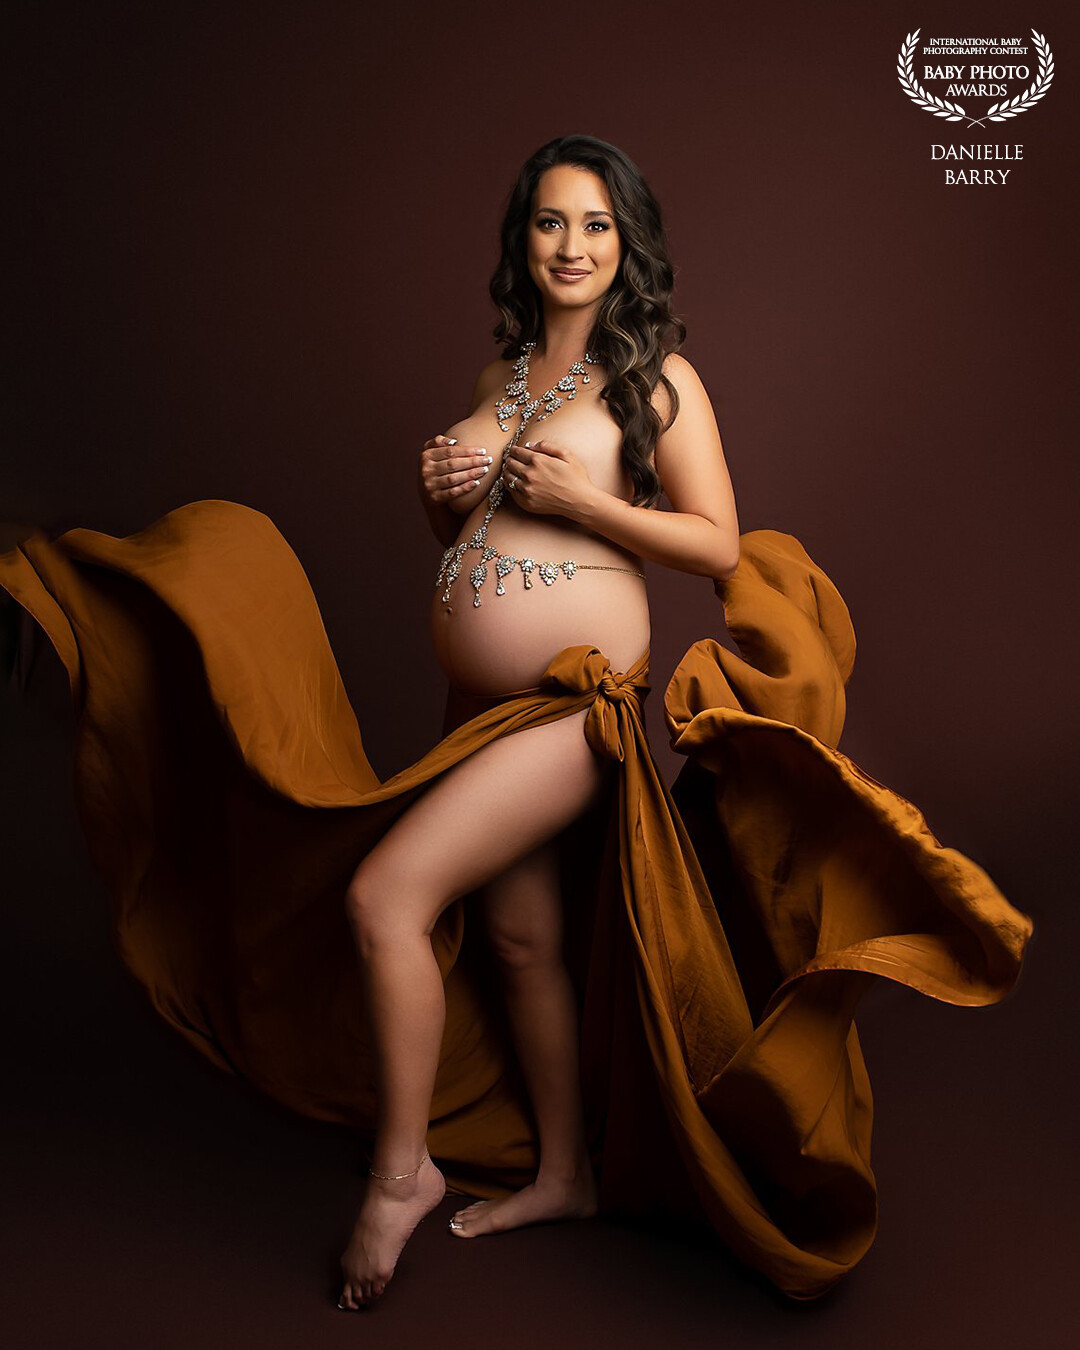 Hayley’s pregnant with her first baby. They are very excited to welcome their baby into the world. I had such a fun maternity session. We played around with many different gowns and looks. She looked stunning in everything she wore.